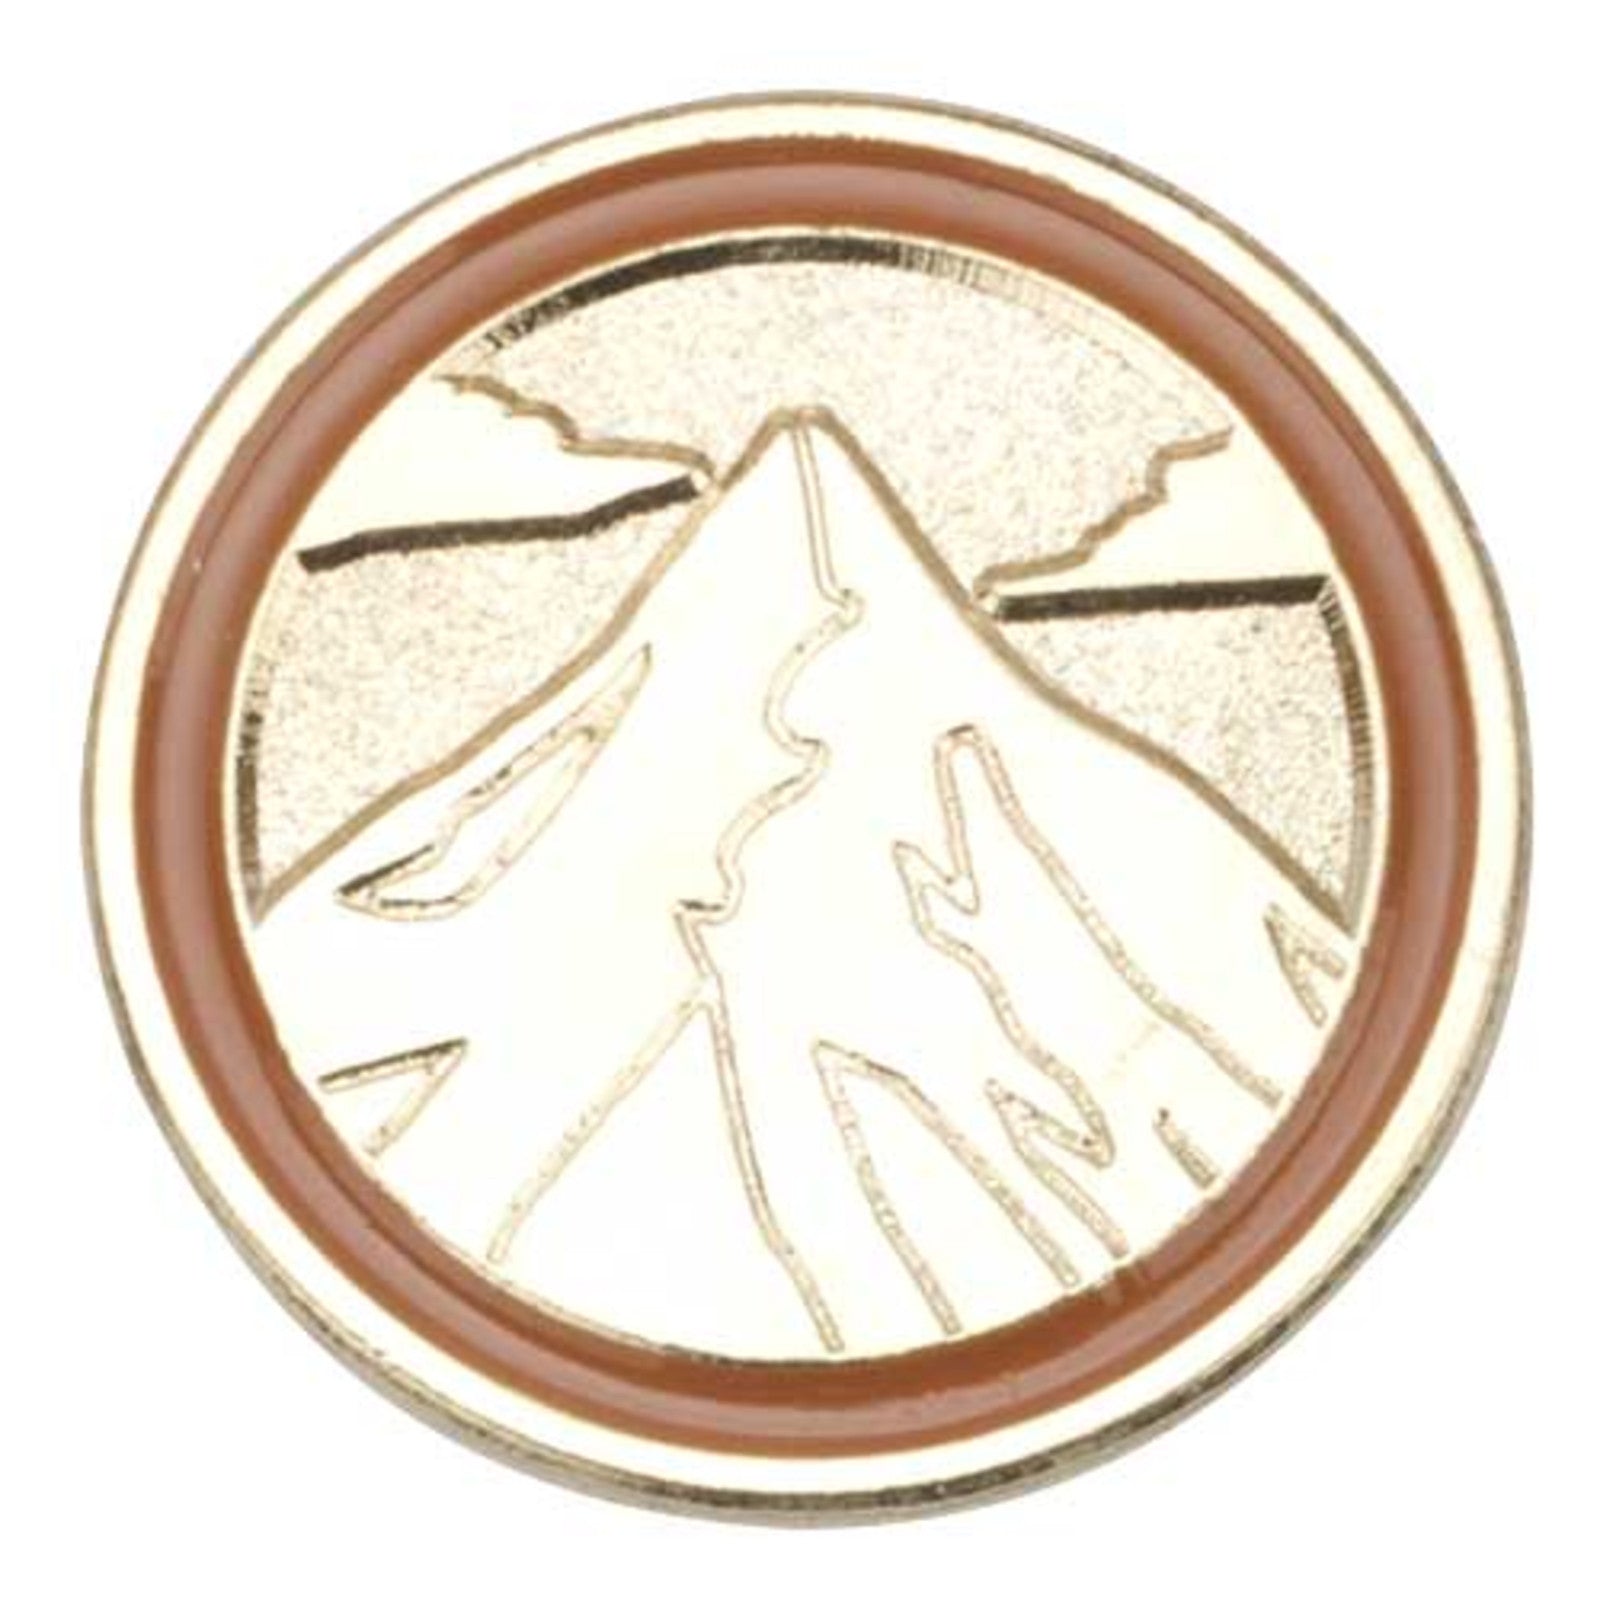 Girl Scouts Brownie Journey Summit Award Pin - Basics Clothing Store